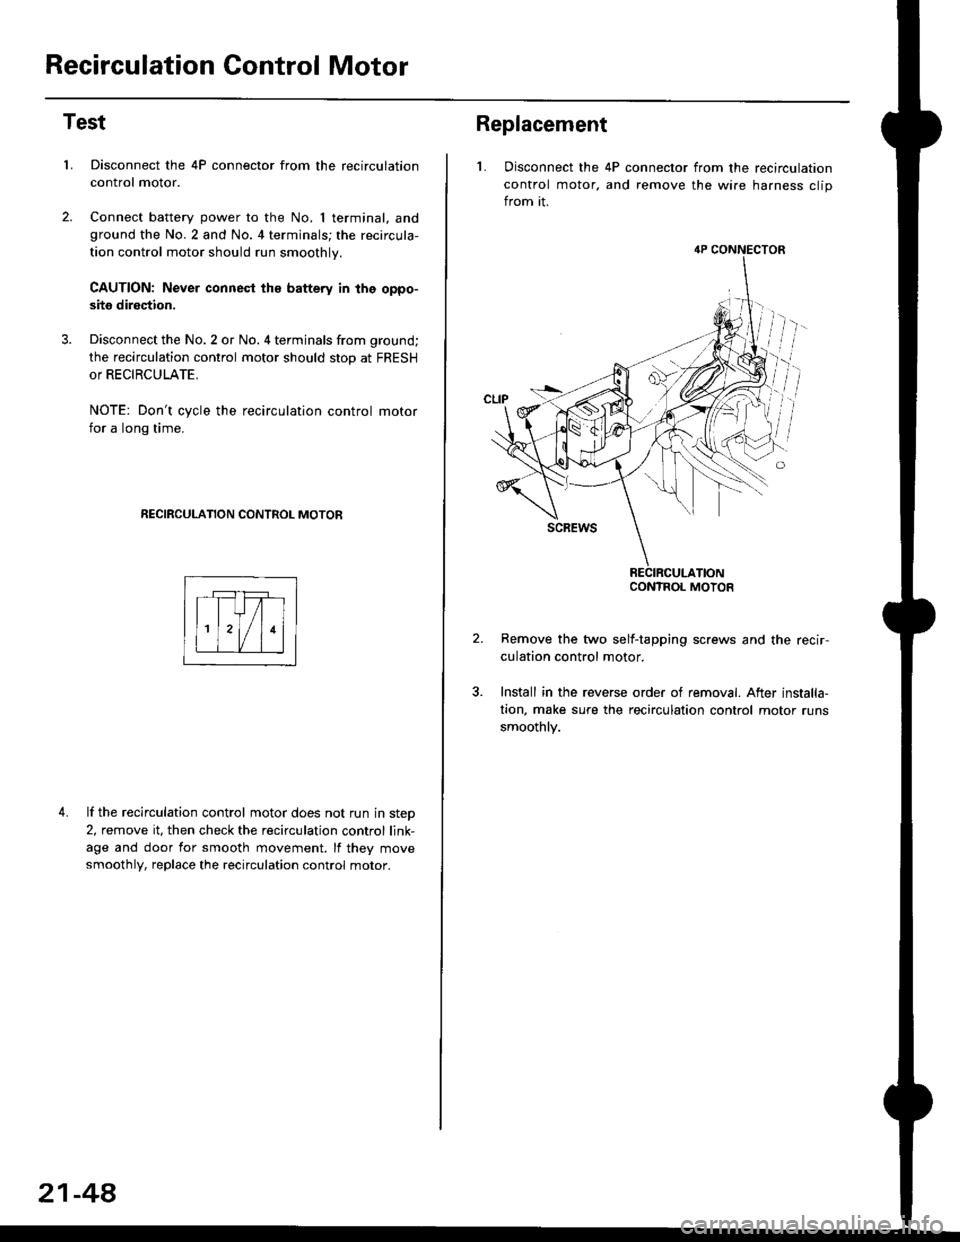 HONDA CIVIC 1998 6.G Workshop Manual Recirculation Control Motor
Test
LDisconnect the 4P connector from the recirculation
control motor.
Connect battery power to the No. I terminal, andground the No.2 and No. 4 terminals; the recircula-
